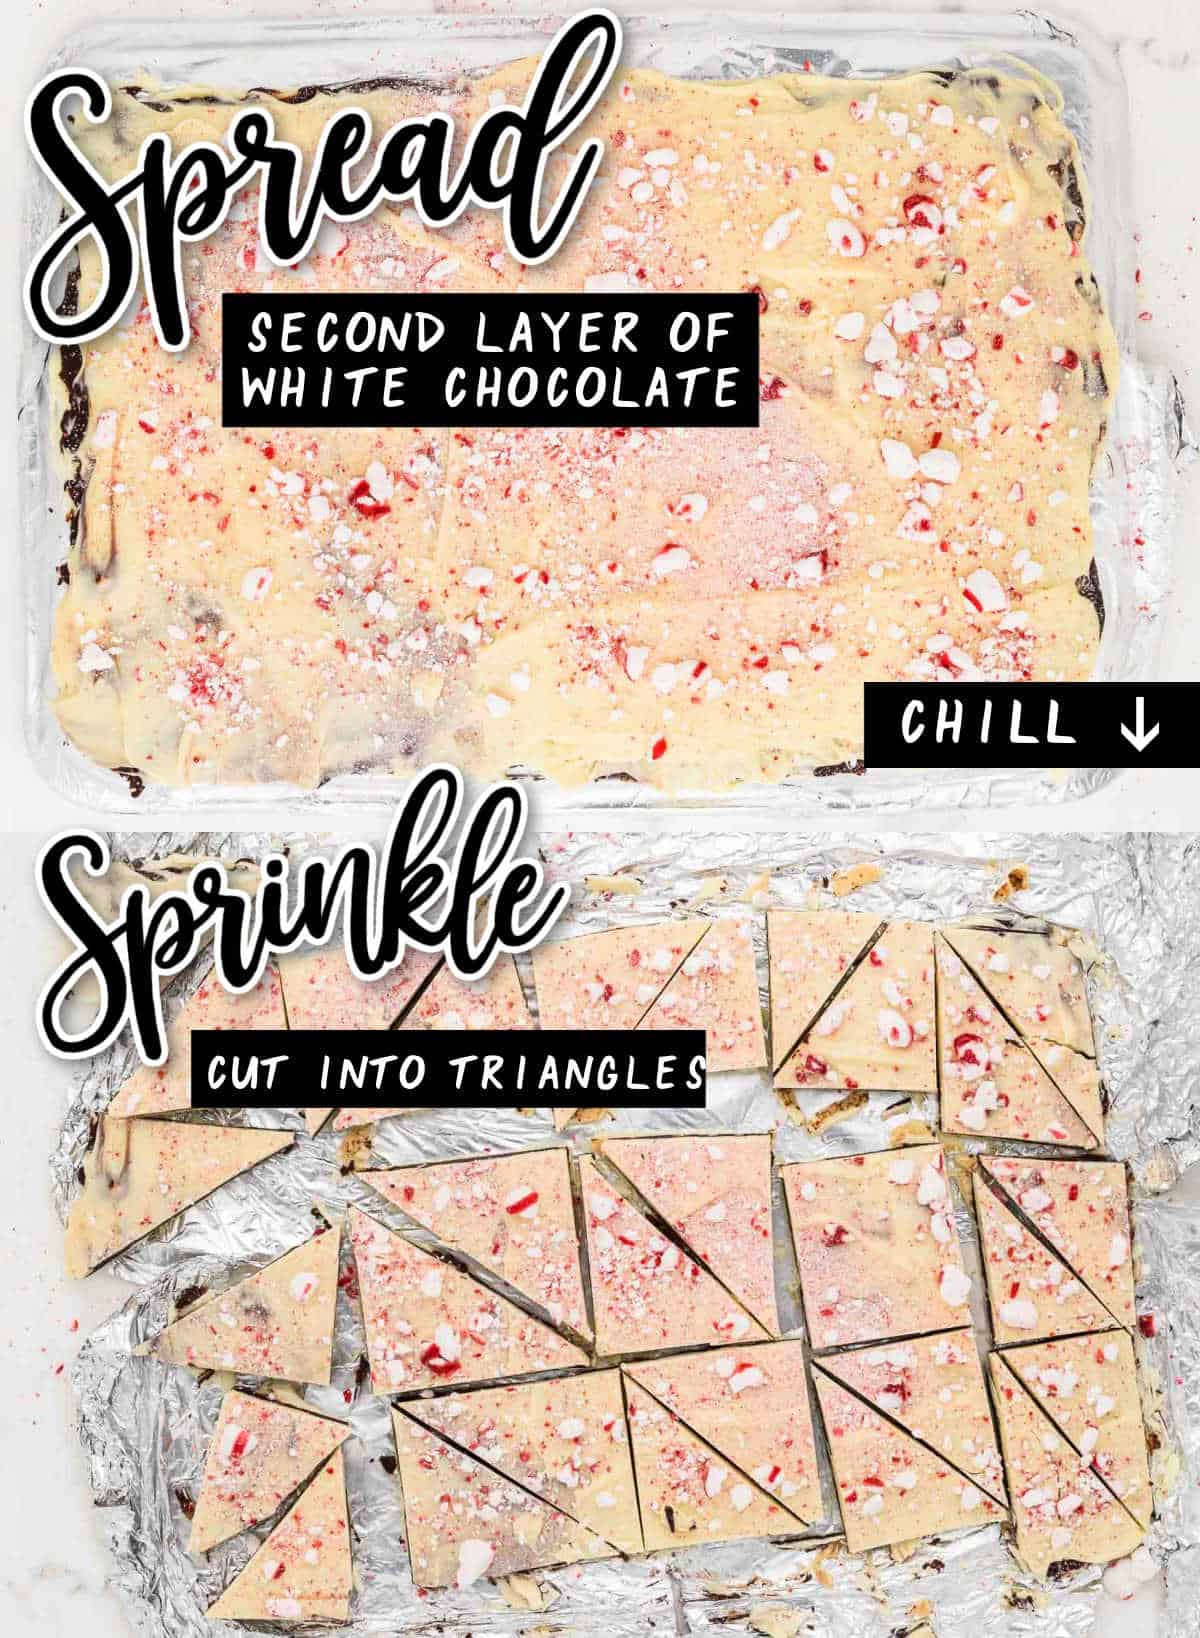 STEP: Spread the top layer of white chocolate, sprinkle with peppermint candy, and cut into triangles